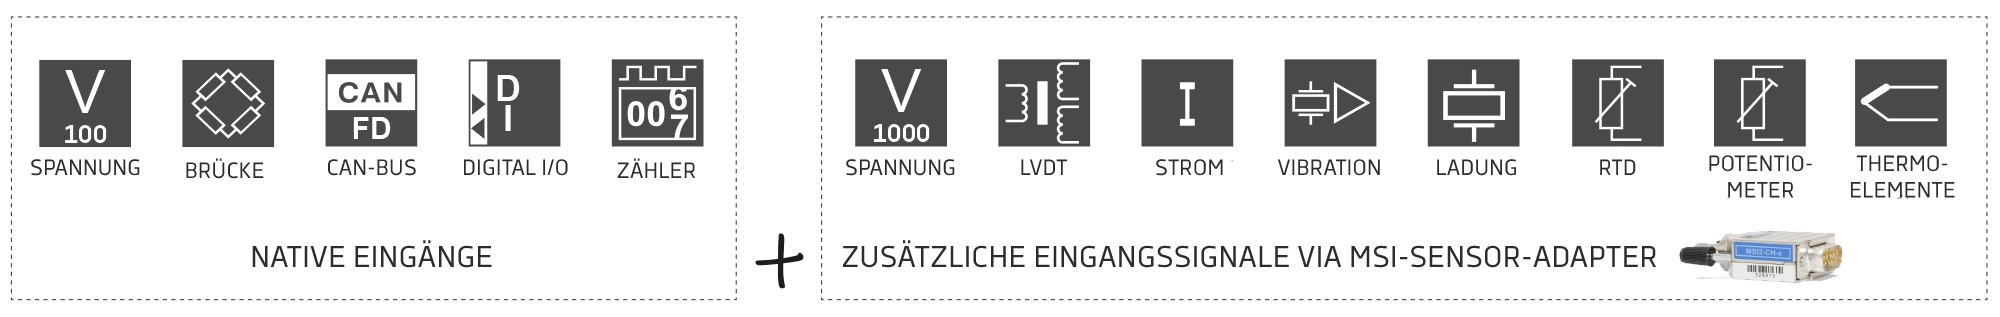 Spannung, Brücke, LVDT, Strom, Vibration, Ladung, Thermoelemente, Potentiometer, CAN-FD